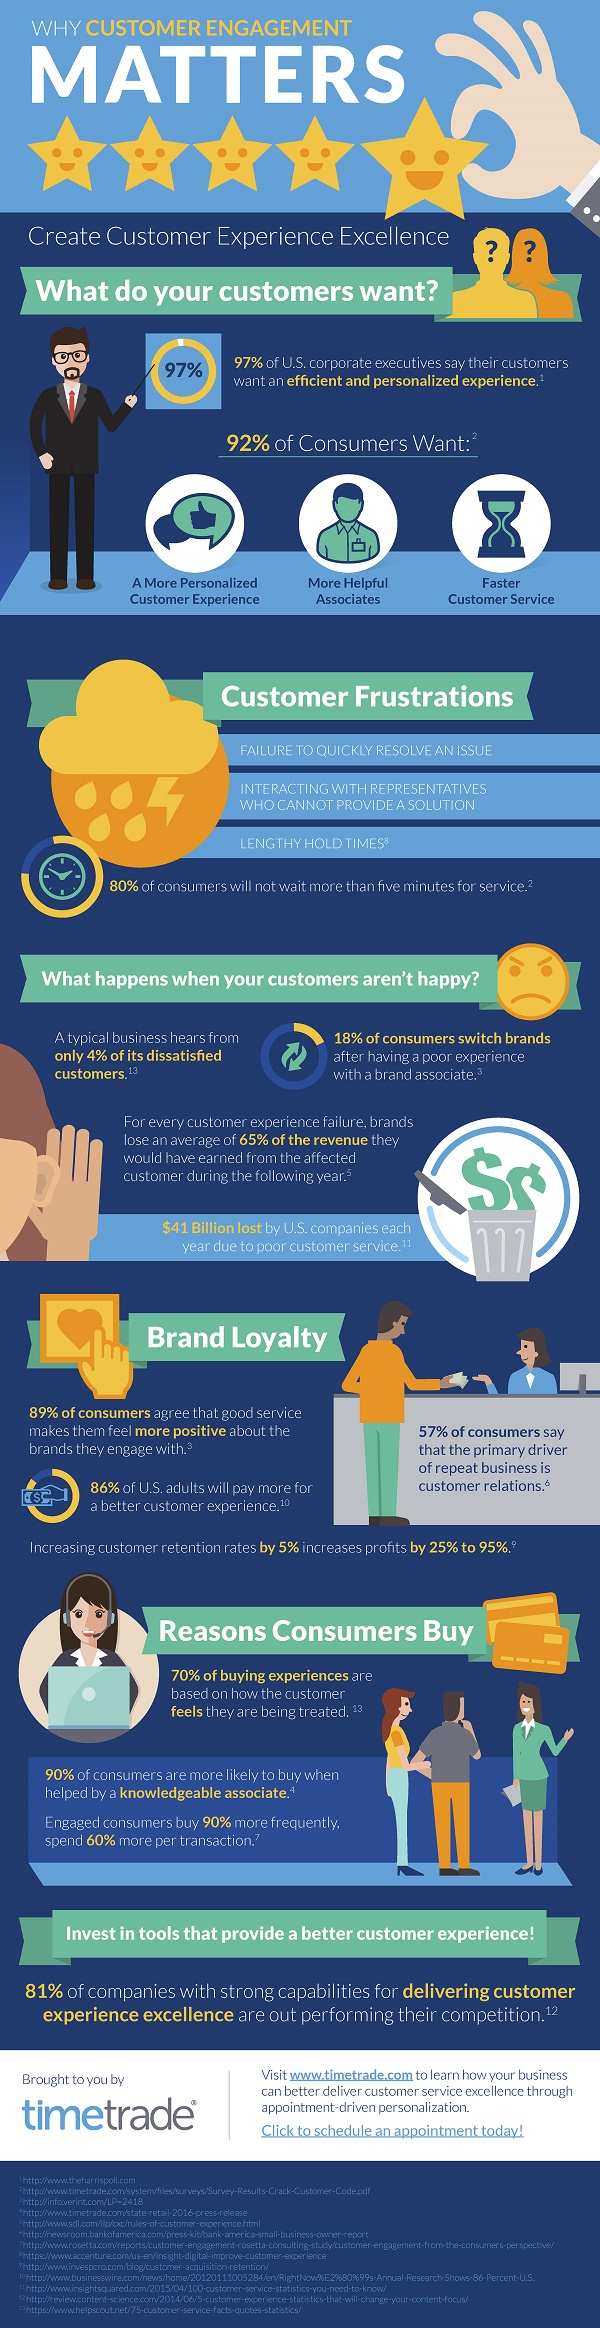 TimeTrade_Why_Customer_Engagement_Matters_Infographic